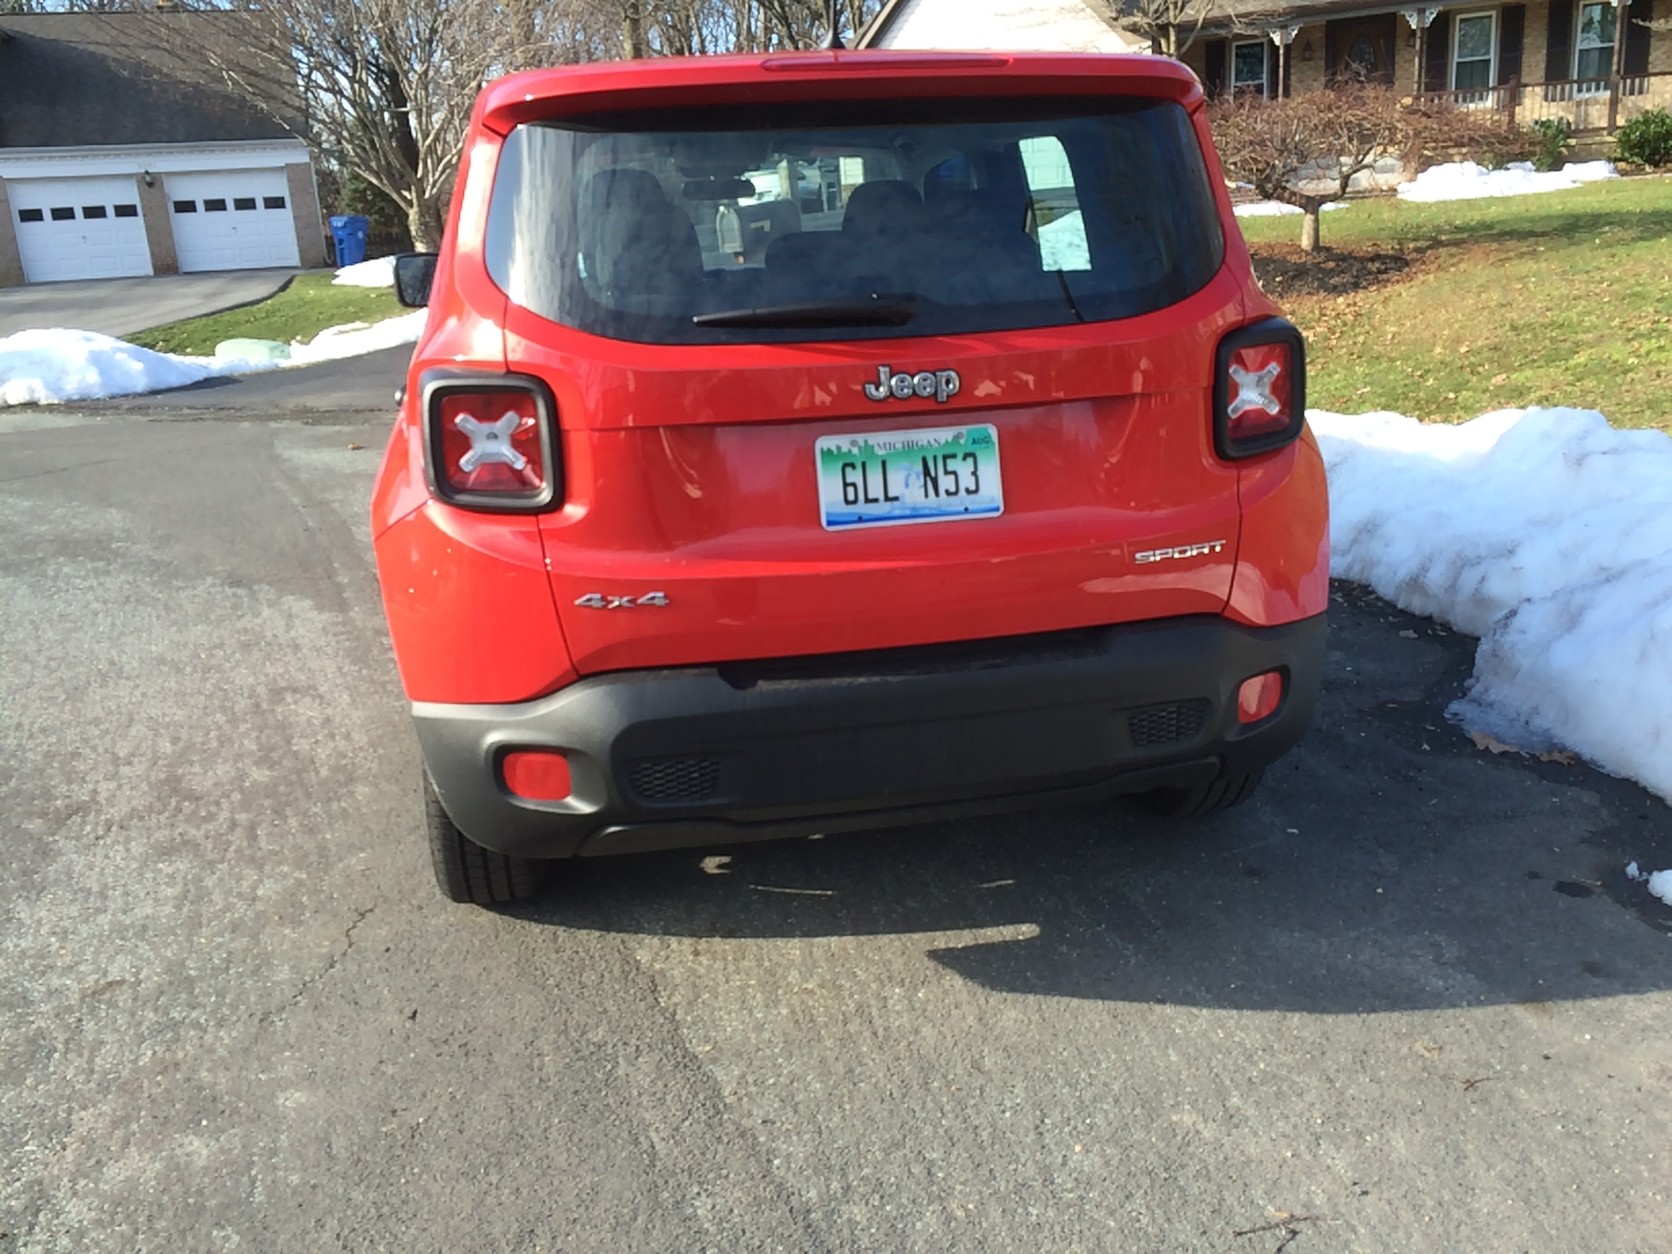 The Jeep Renegade Sport is cheap and fun, with a small engine and manual transmission. (WTOP/Mike Parris)